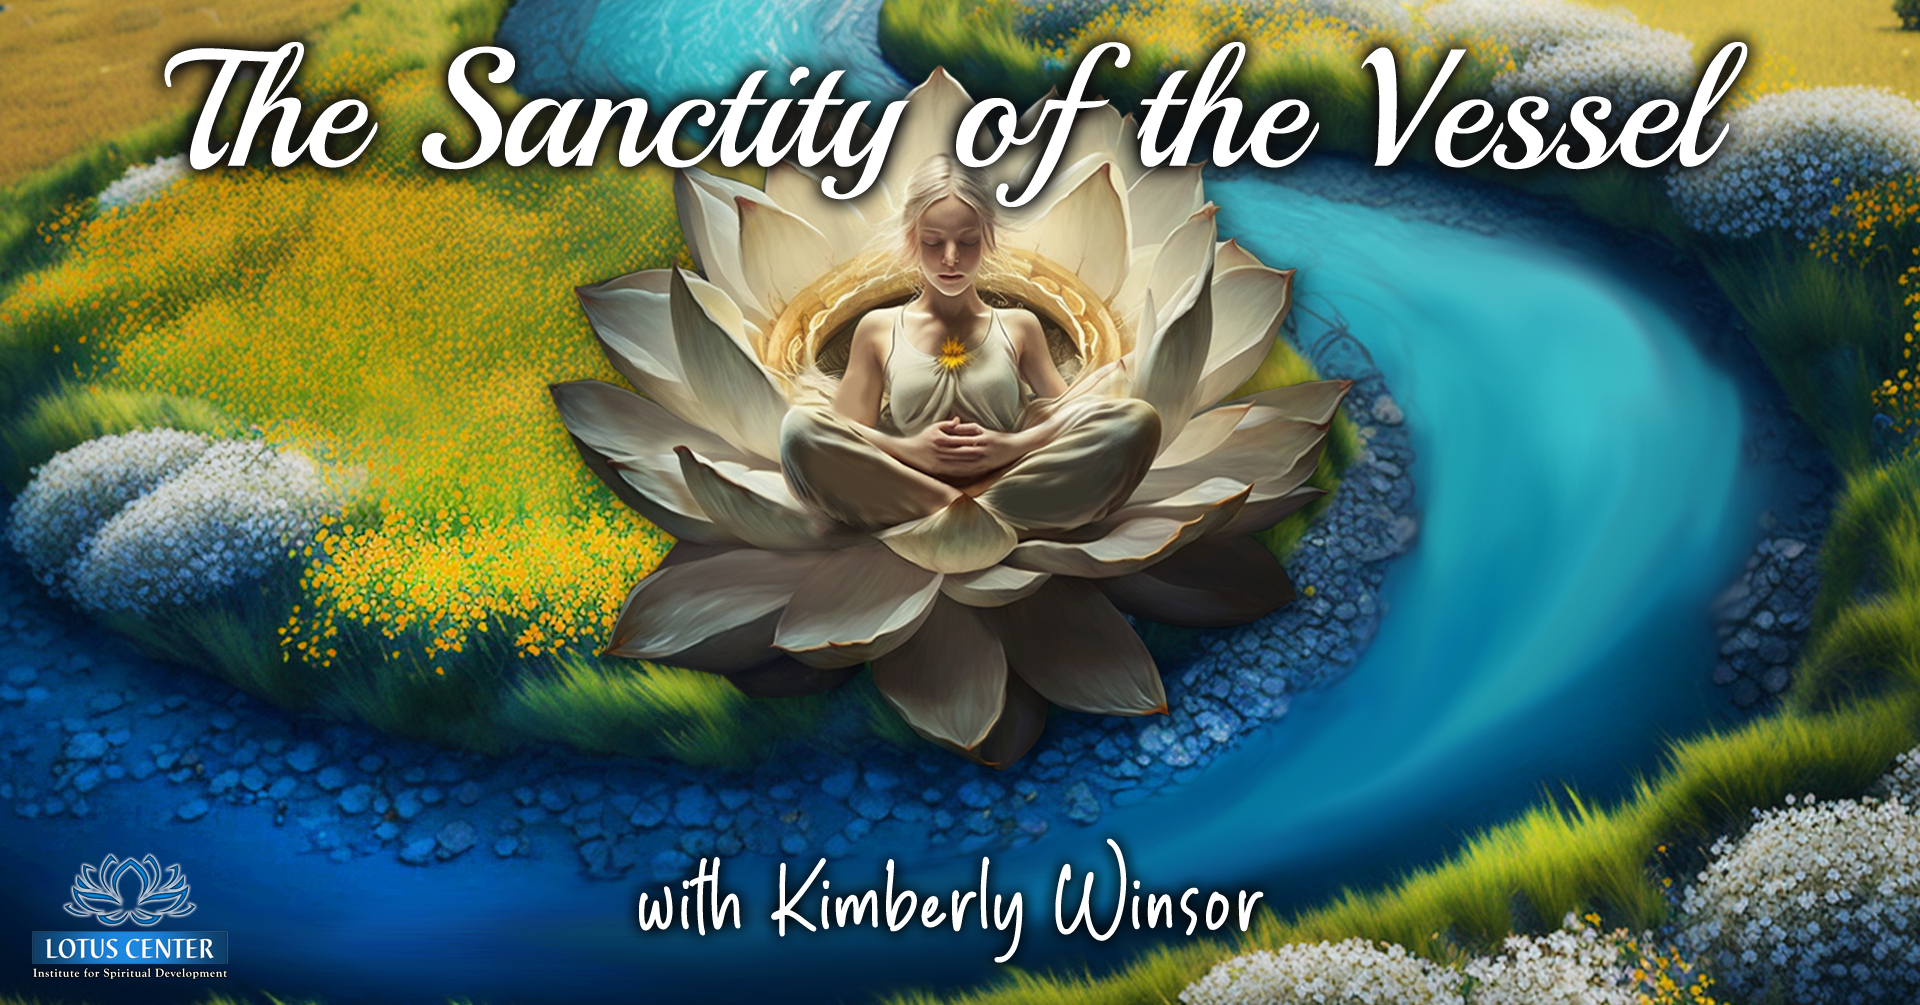 Sanctity of the Vessel with Kimberly Winsor